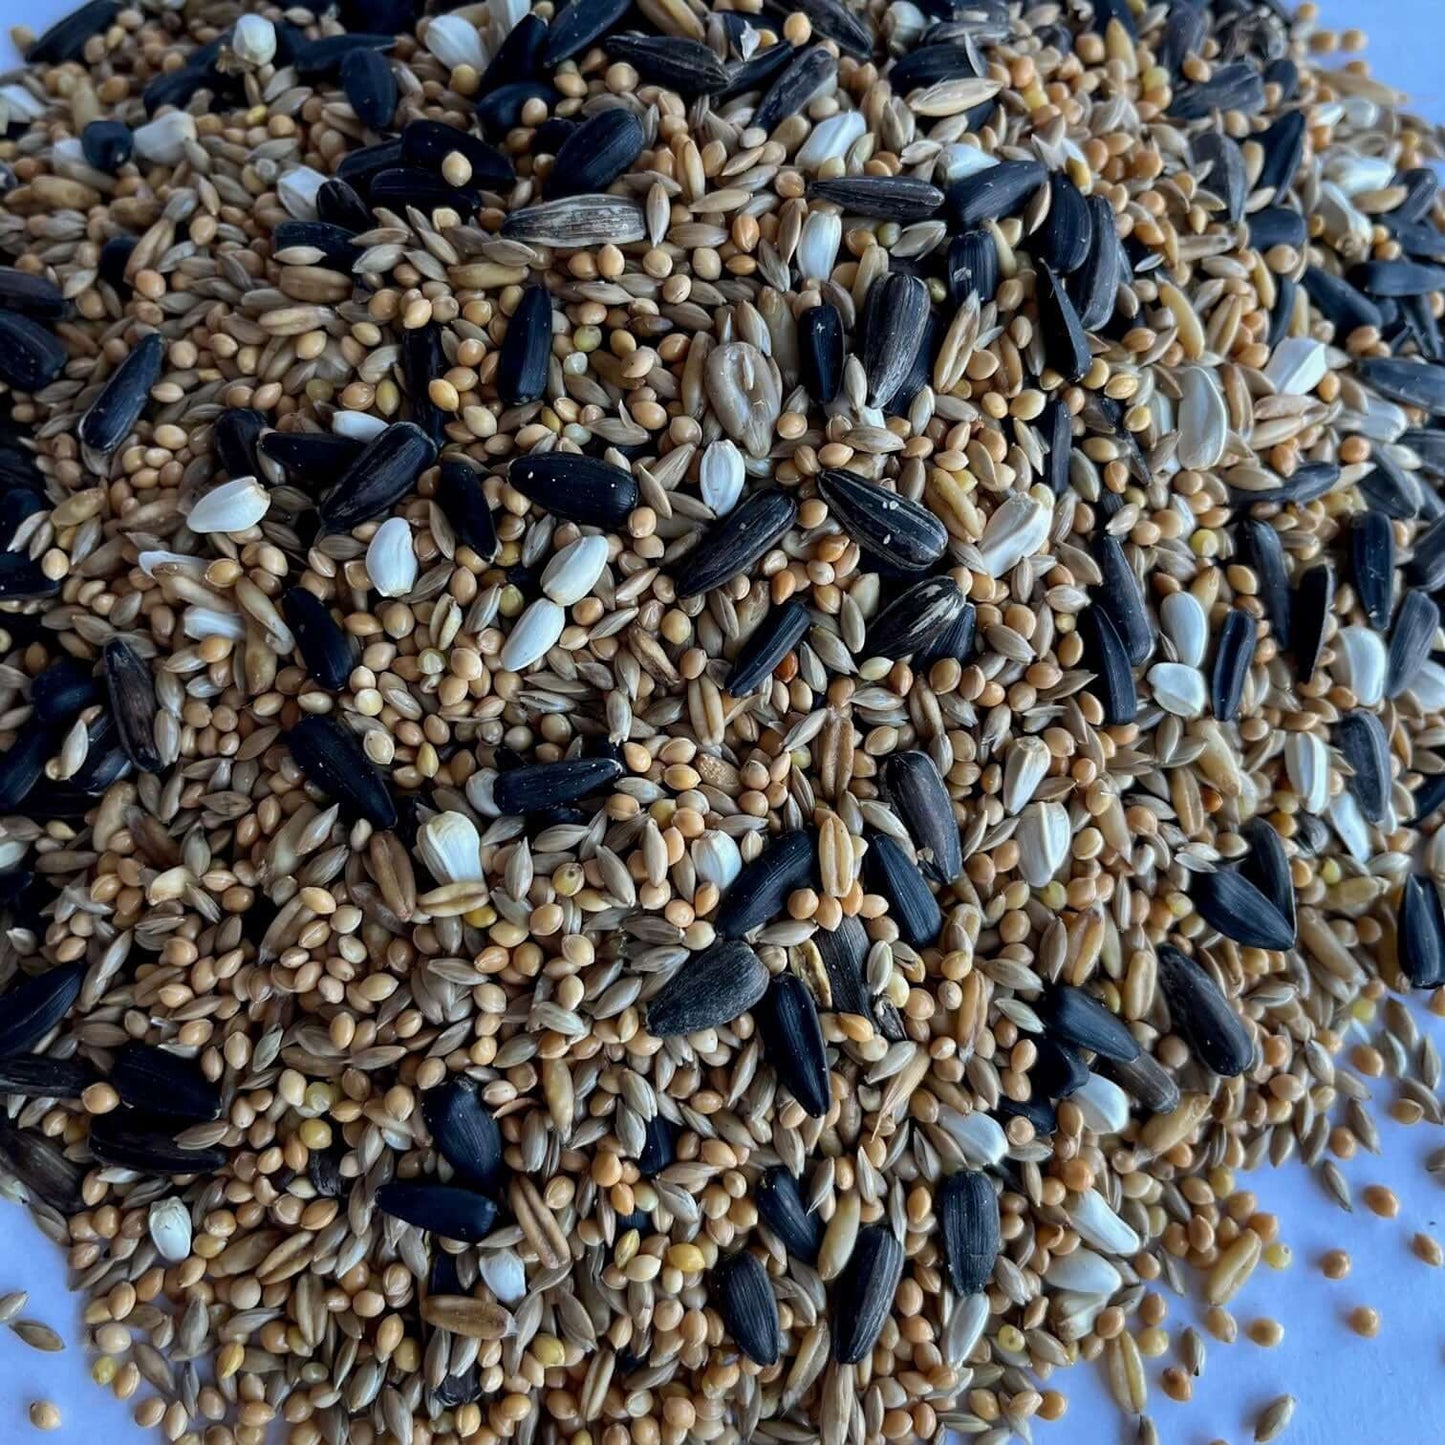 Experts composed this seed mix so that it is ideal for Parakeets and for Cockatiels.